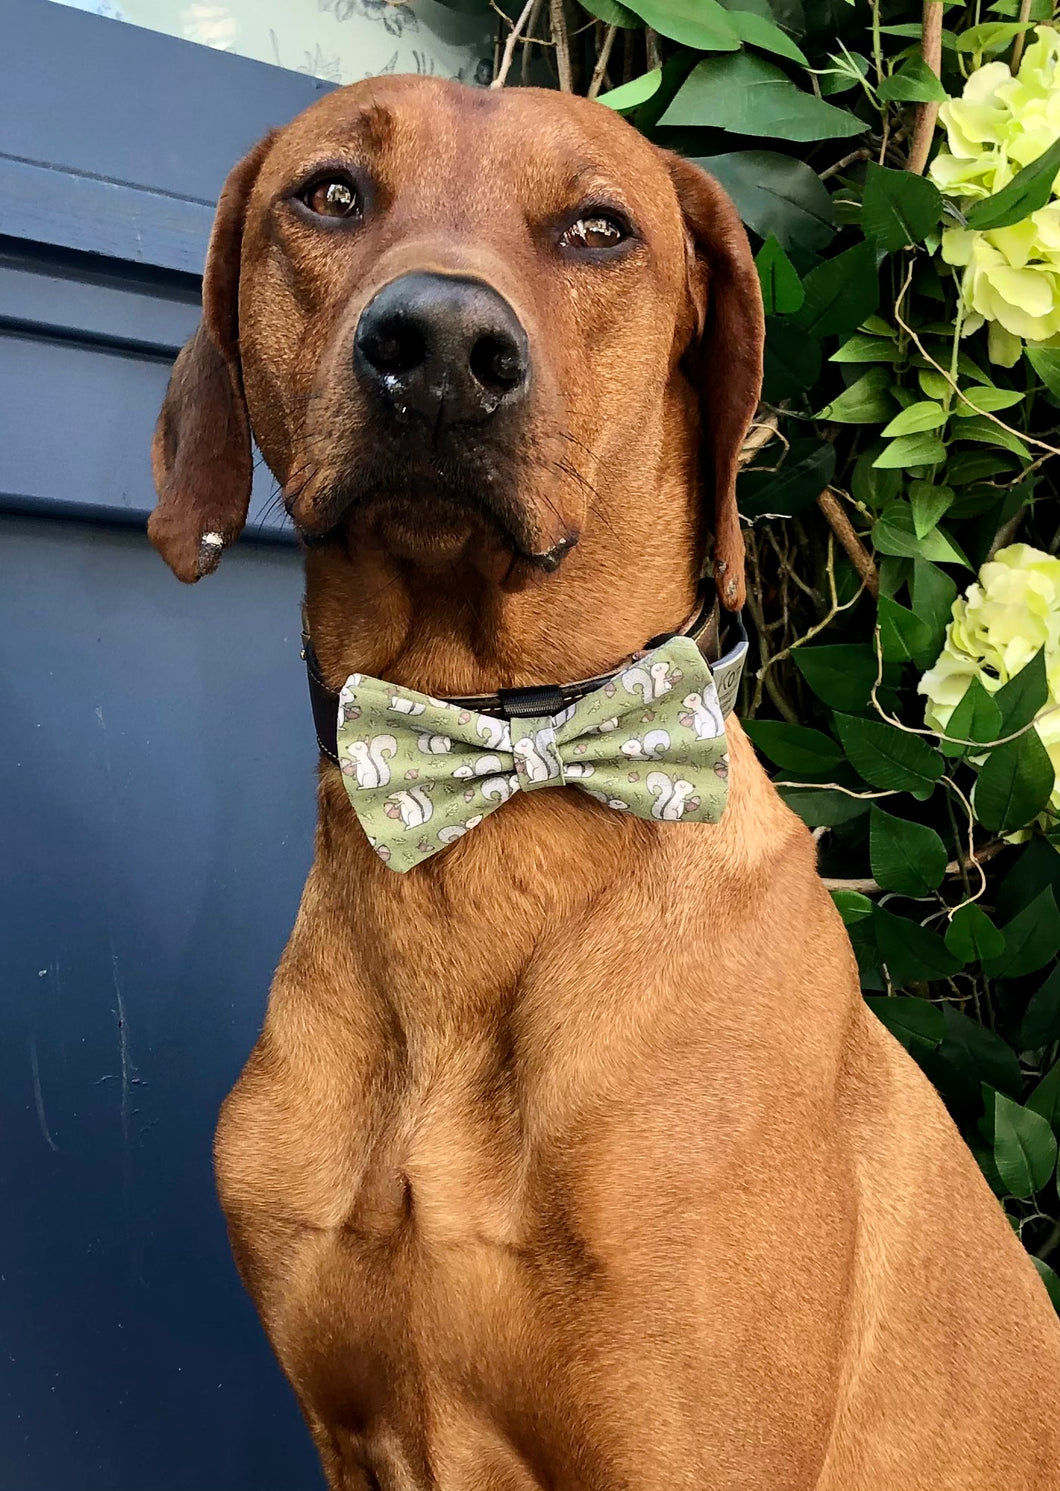 Koa's Ruff Life, Koa in the large green squirrel bow tie. The perfect accessory for the squirrel enthusiast.